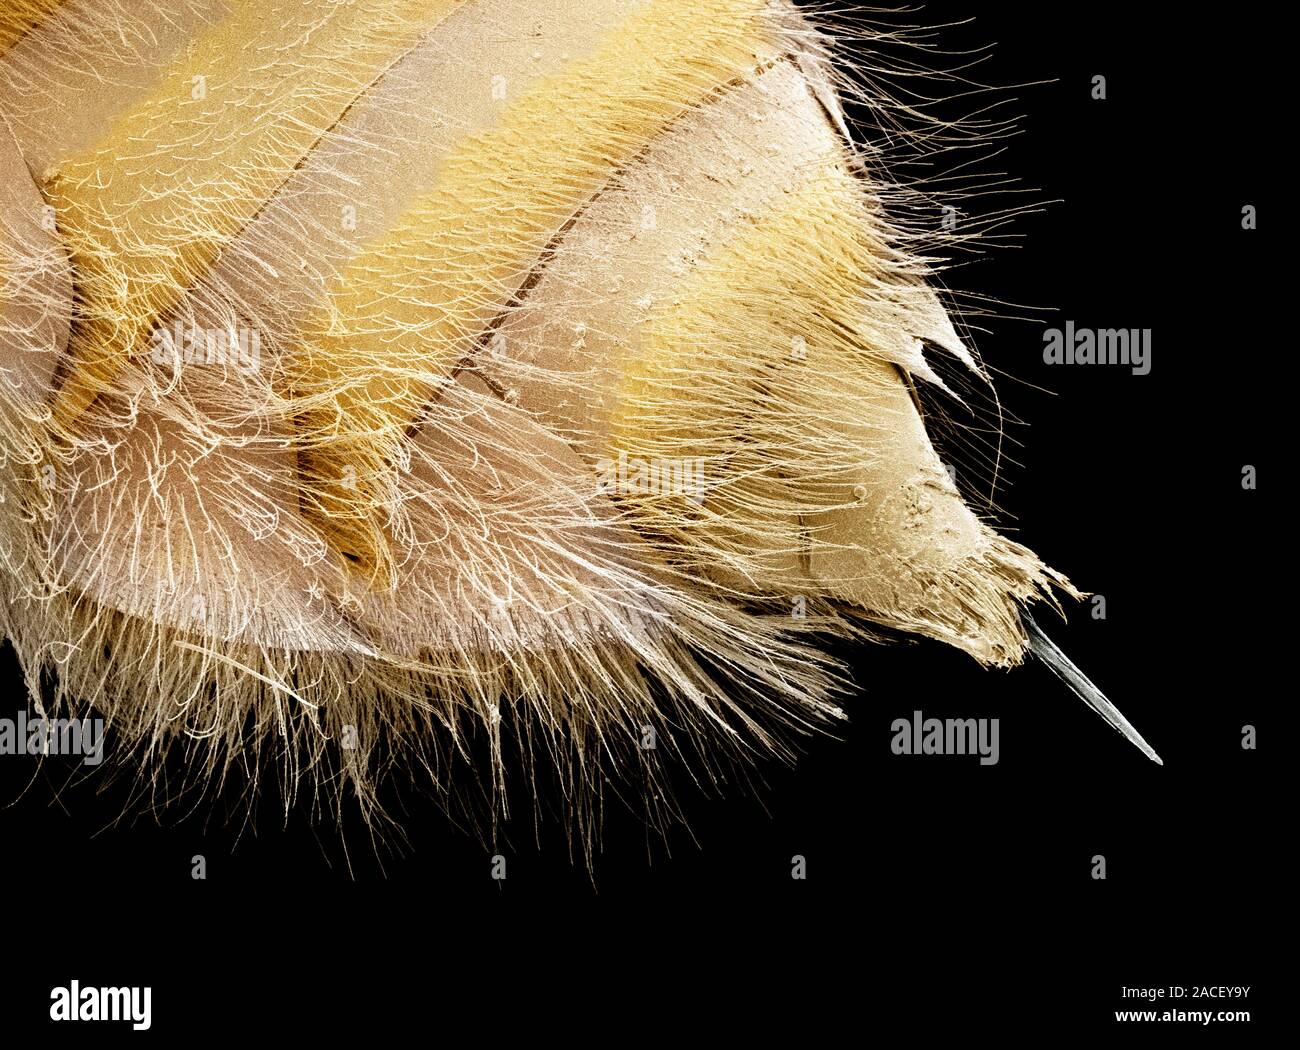 Bee stinger. Scanning electron micrograph of the end of a bee's (Apis sp.) abdomen showing the stinger (needle-like). The stinger is used to inject ve Stock Photo